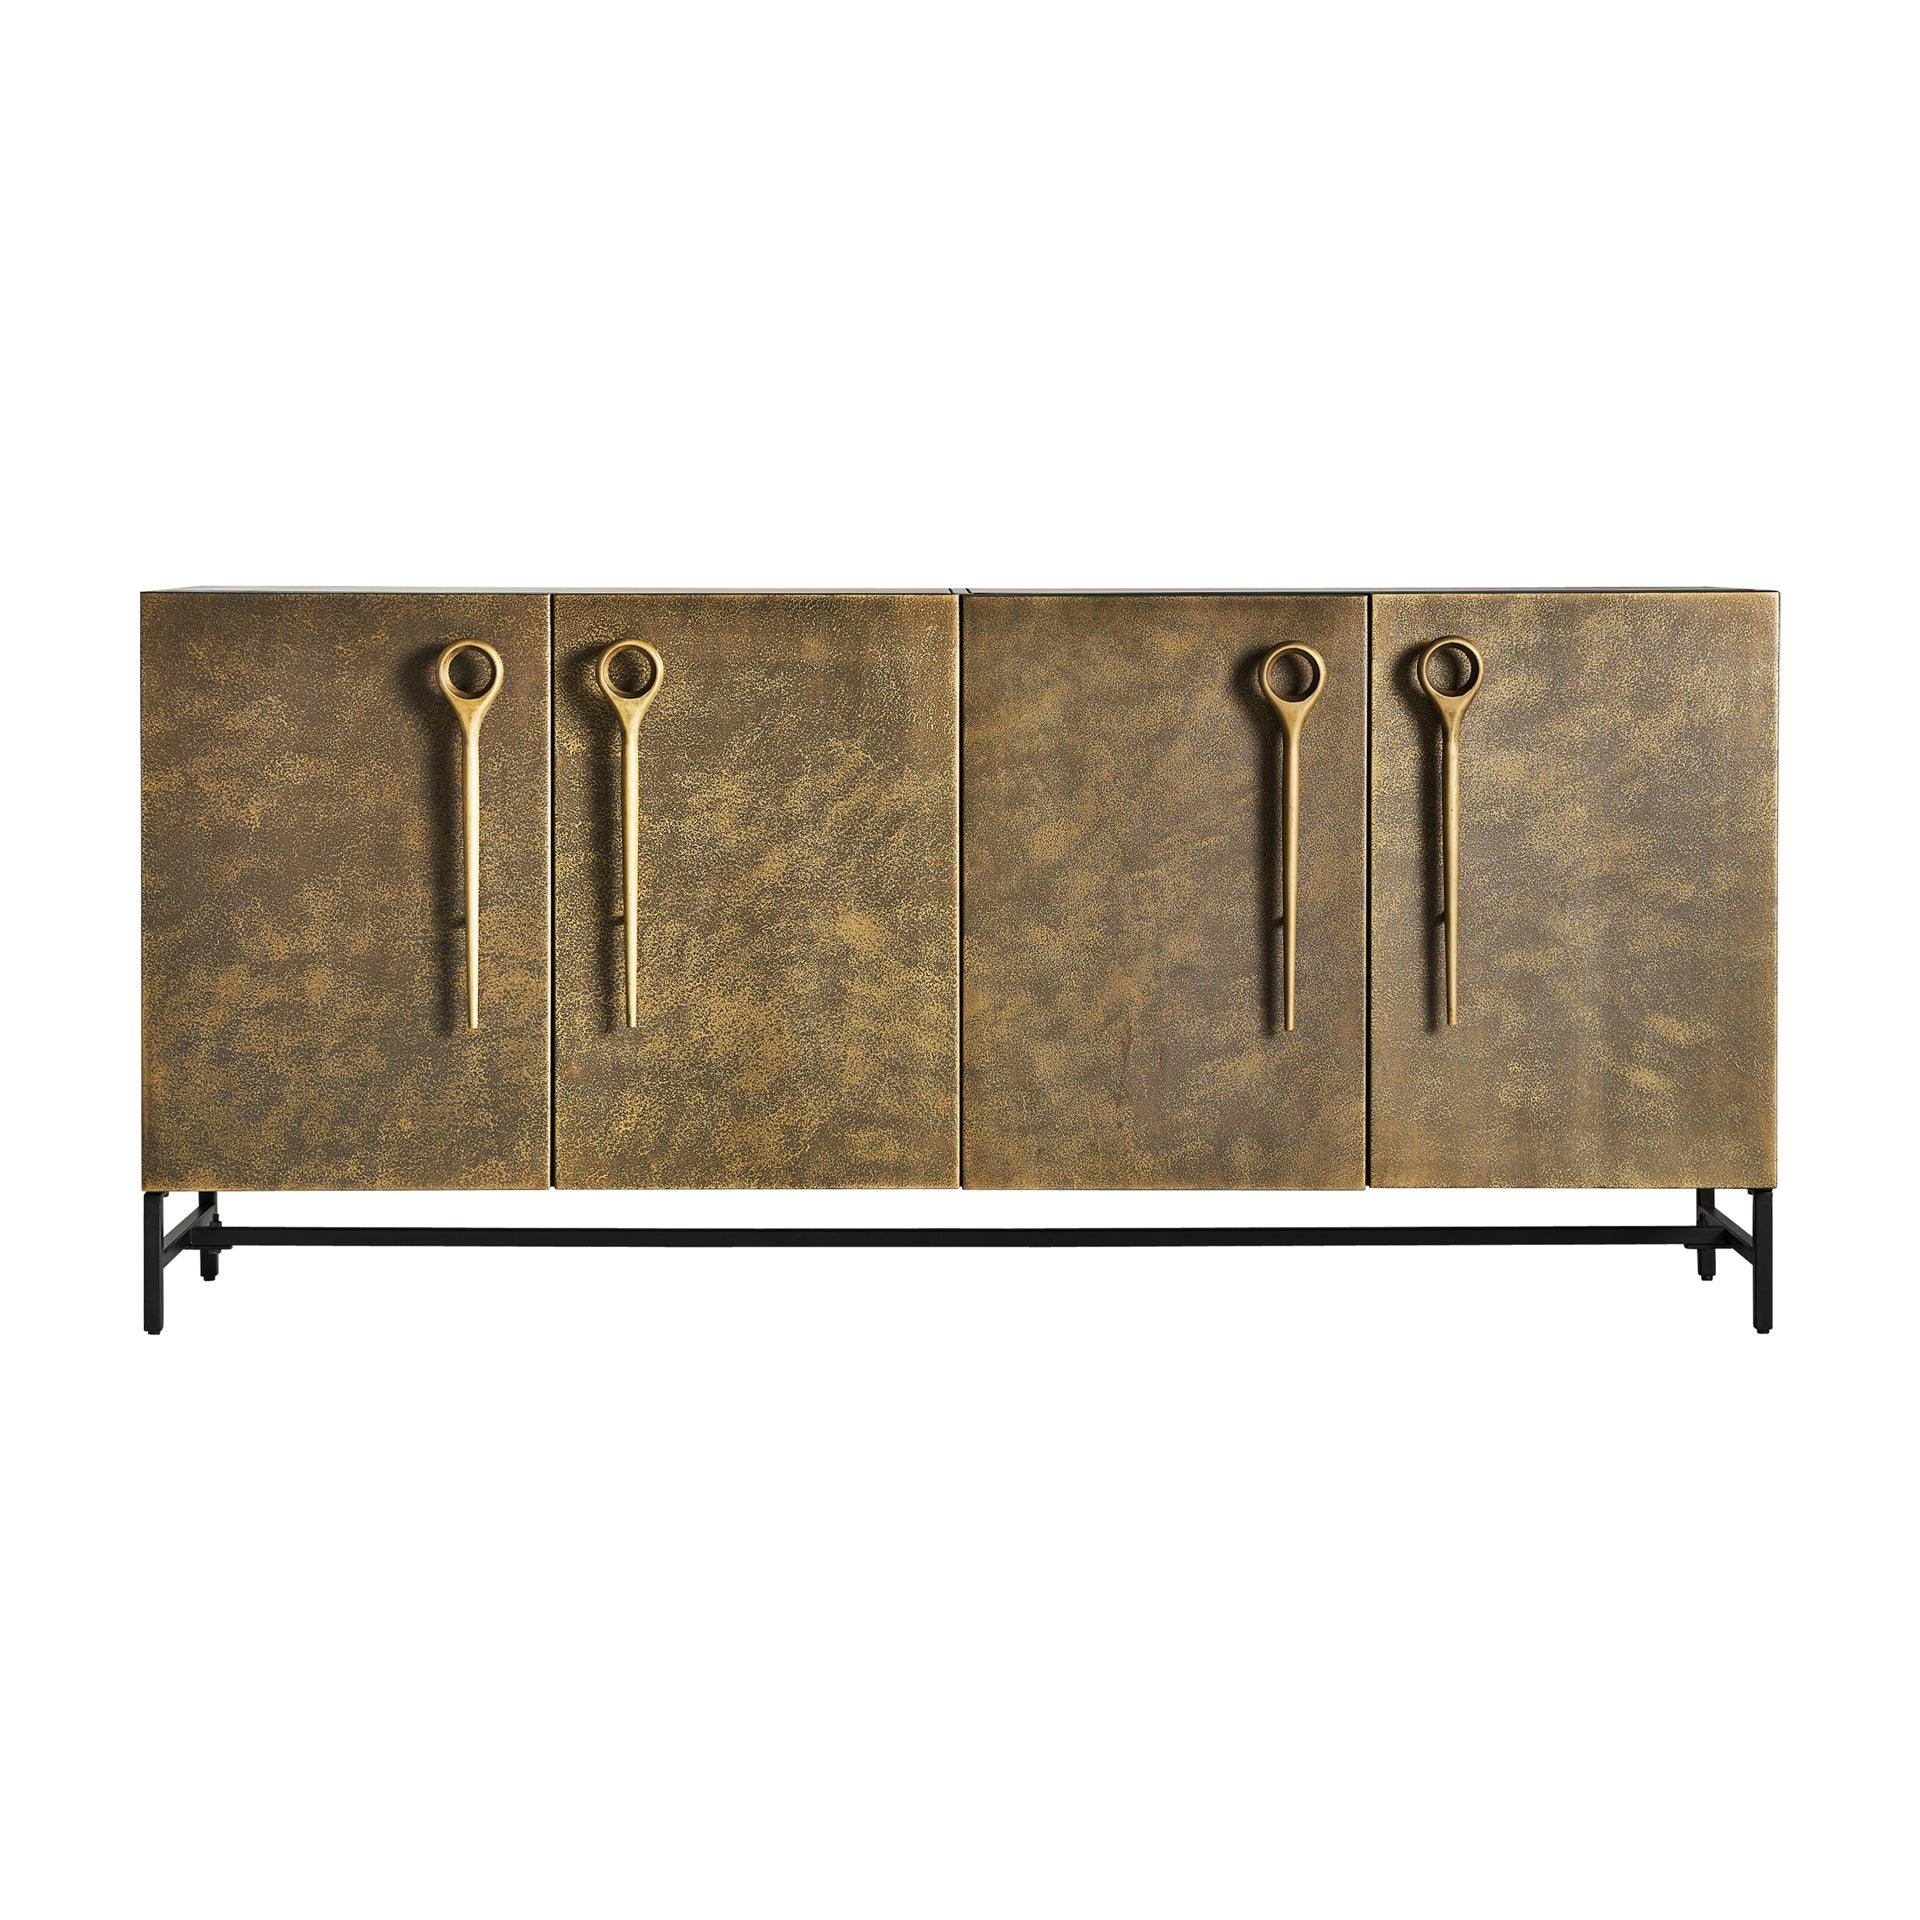 Bouloire Gold Iron Sideboard - Maison Rêves UK